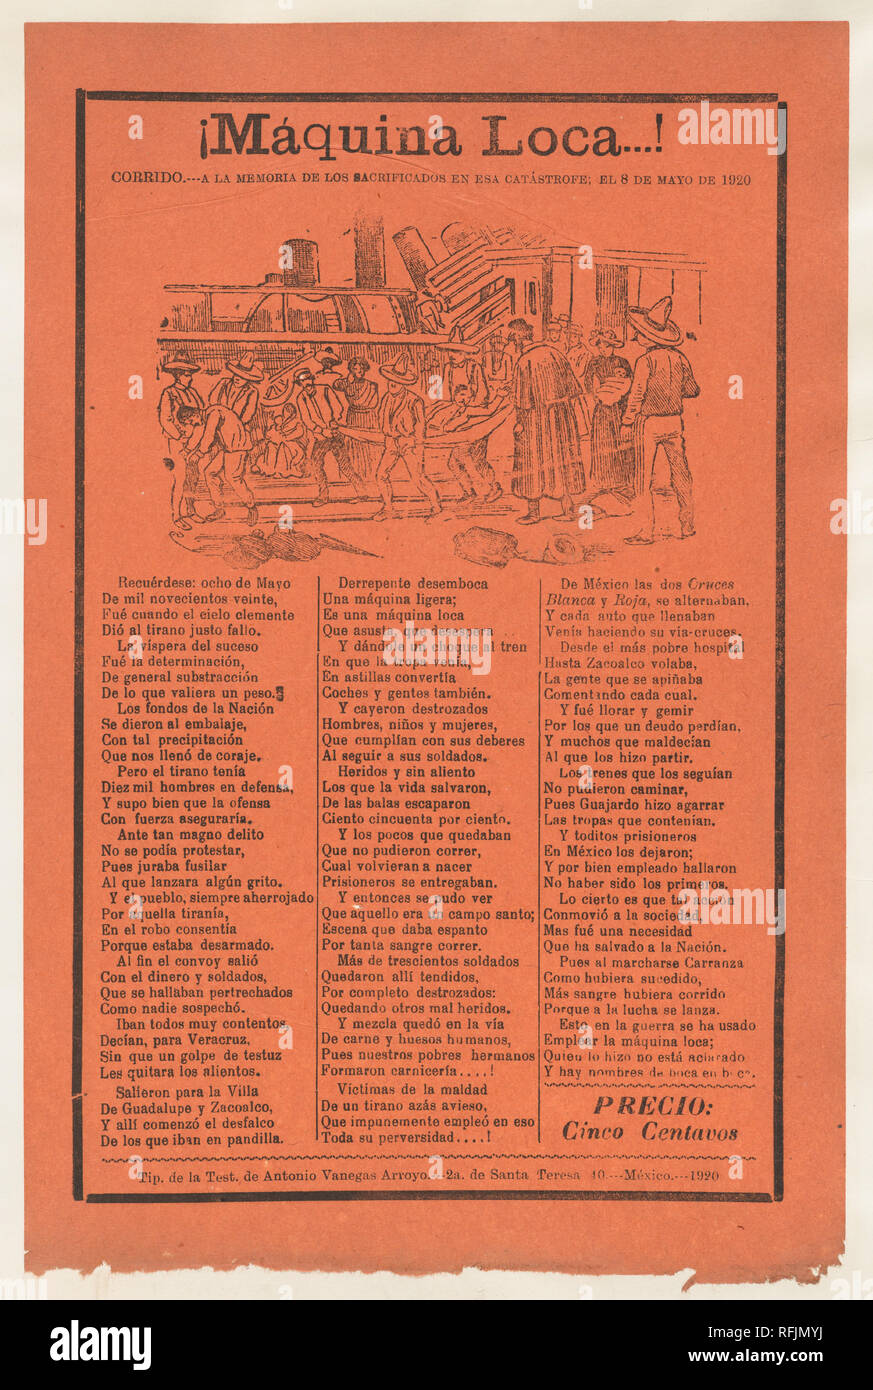 Broadsheet relating to a train accident that killed many people, wounded victims being carried on stretchers. Artist: José Guadalupe Posada (Mexican, 1851-1913). Dimensions: Sheet: 11 13/16 × 7 11/16 in. (30 × 19.5 cm). Publisher: Antonio Vanegas Arroyo (1850-1917, Mexican). Date: 1920 (published). Museum: Metropolitan Museum of Art, New York, USA. Stock Photo